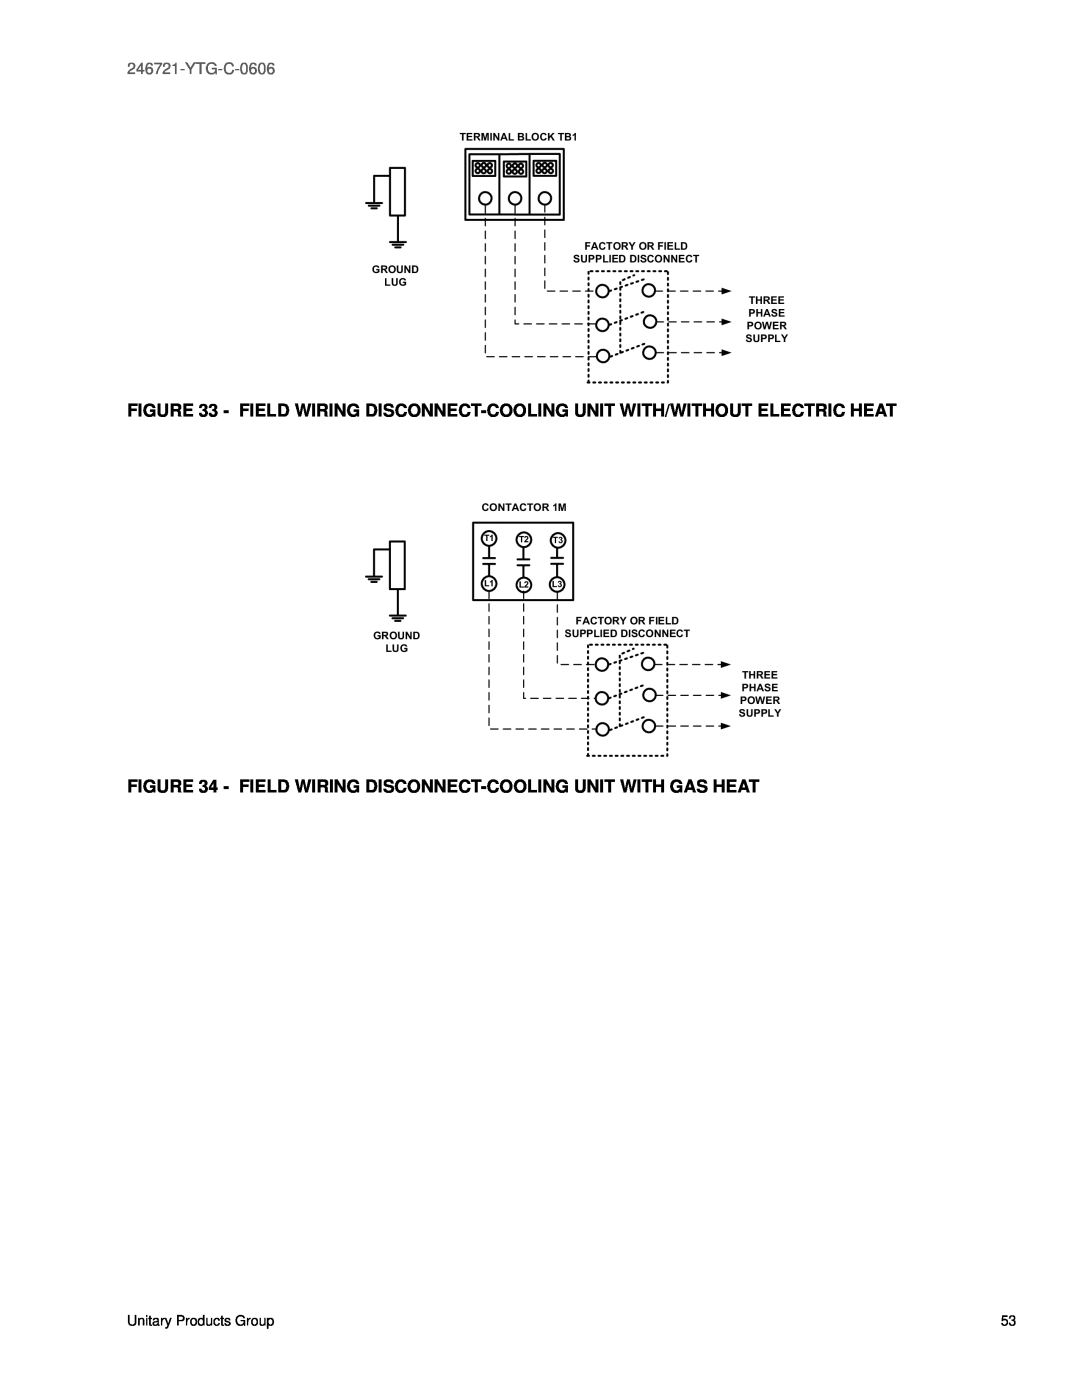 York DR150 Unitary Products Group, TERMINAL BLOCK TB1 FACTORY OR FIELD, Supplied Disconnect Ground Lug Three Phase Power 